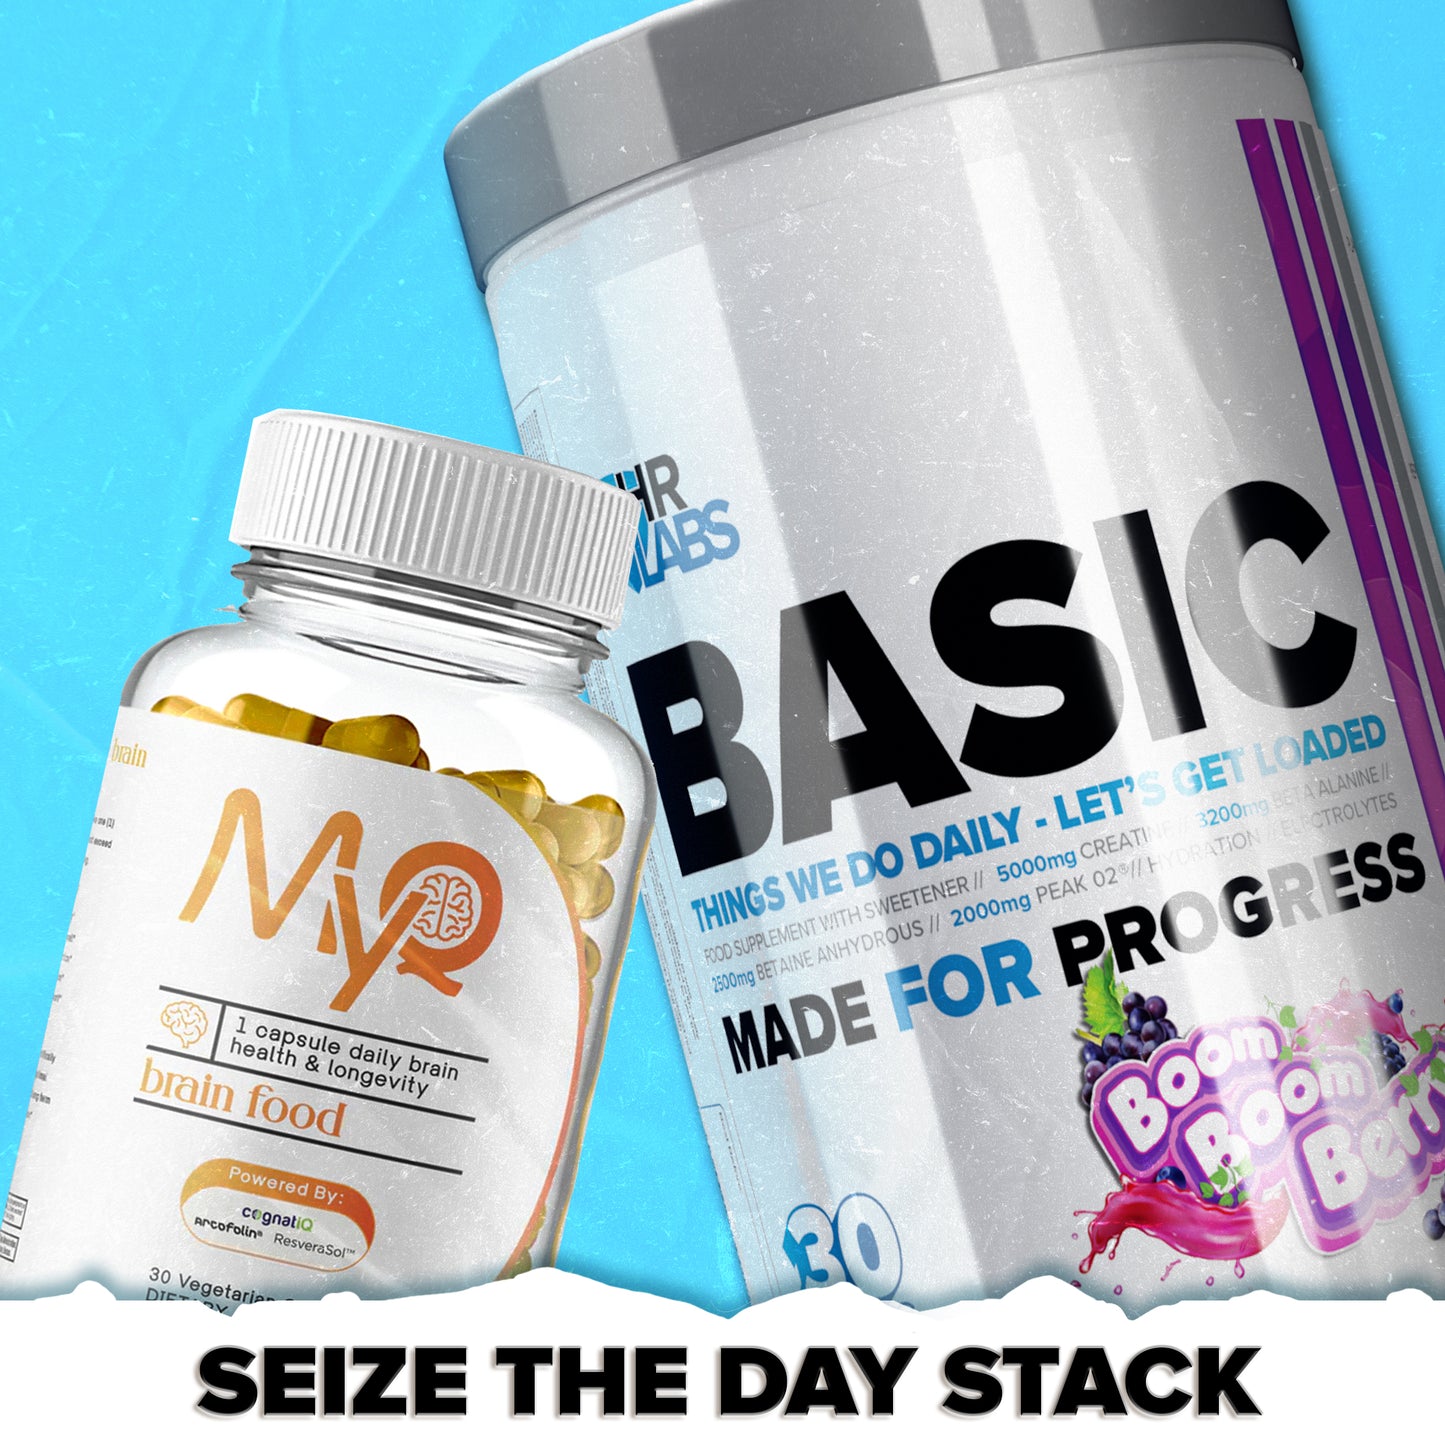 SEIZE THE DAY STACK